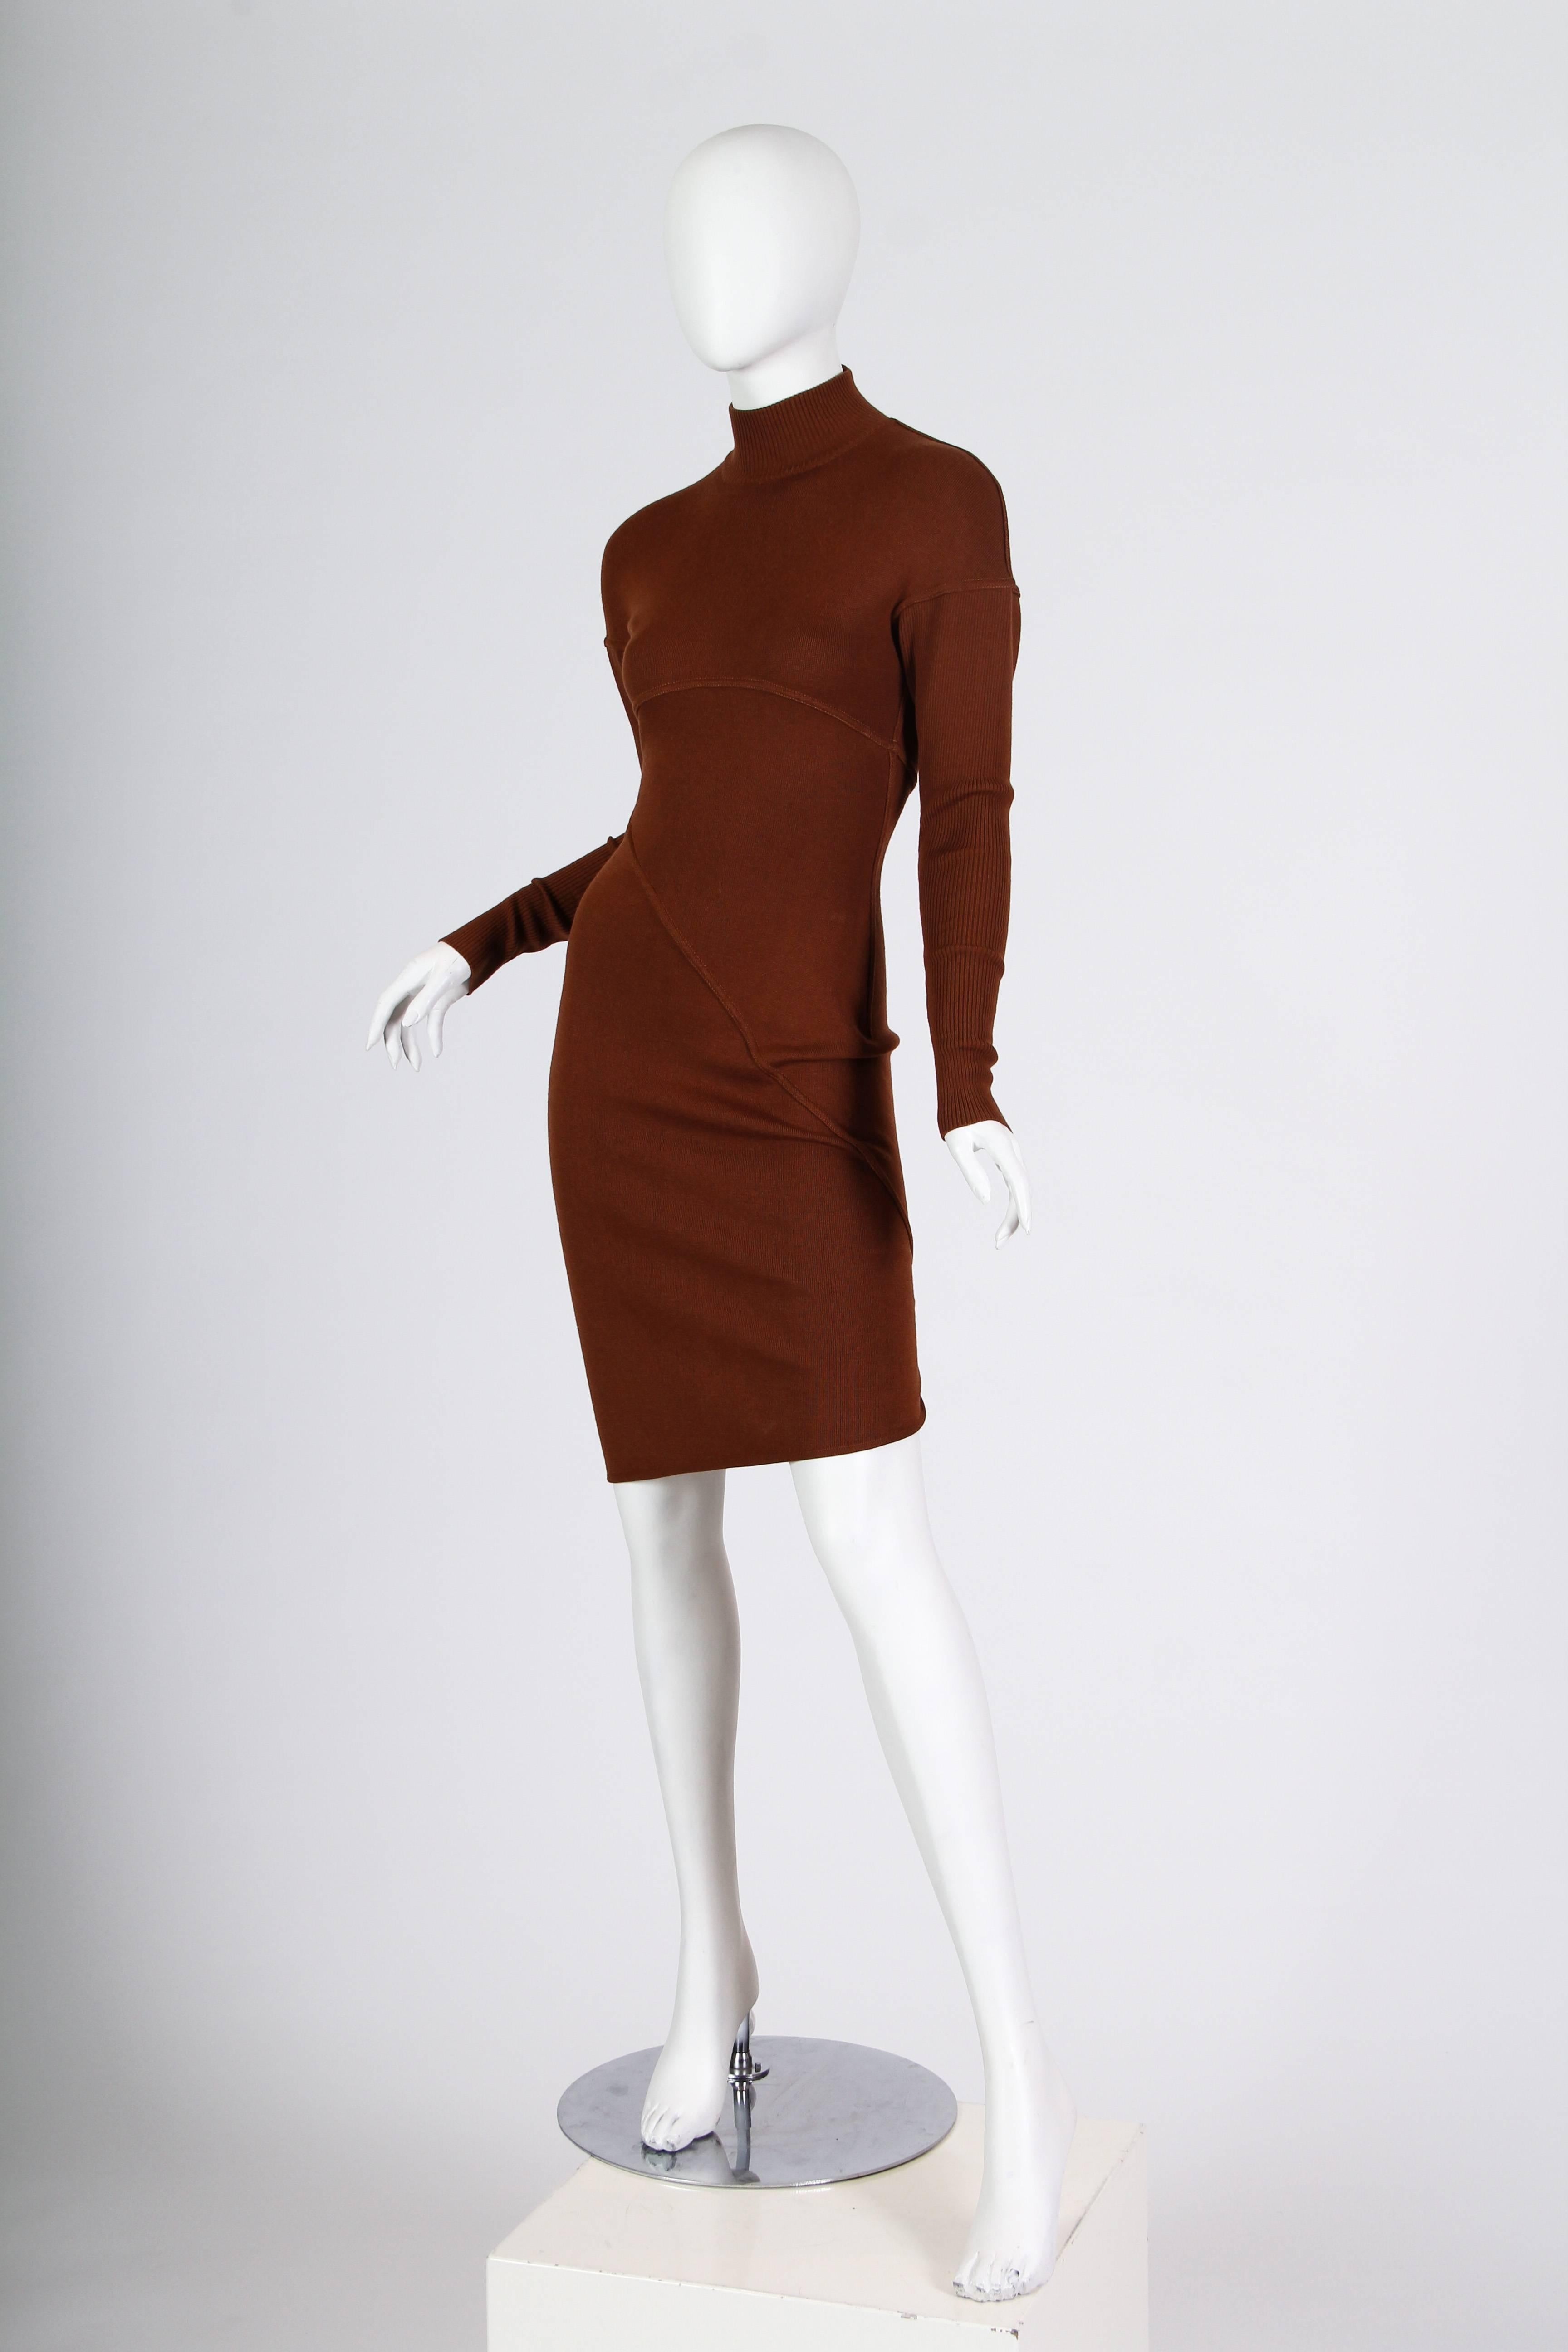 1980S AZZEDINE ALAIA Cinnamon Brown Wool Knit Turtleneck Body-Con Dress With Di In Excellent Condition For Sale In New York, NY